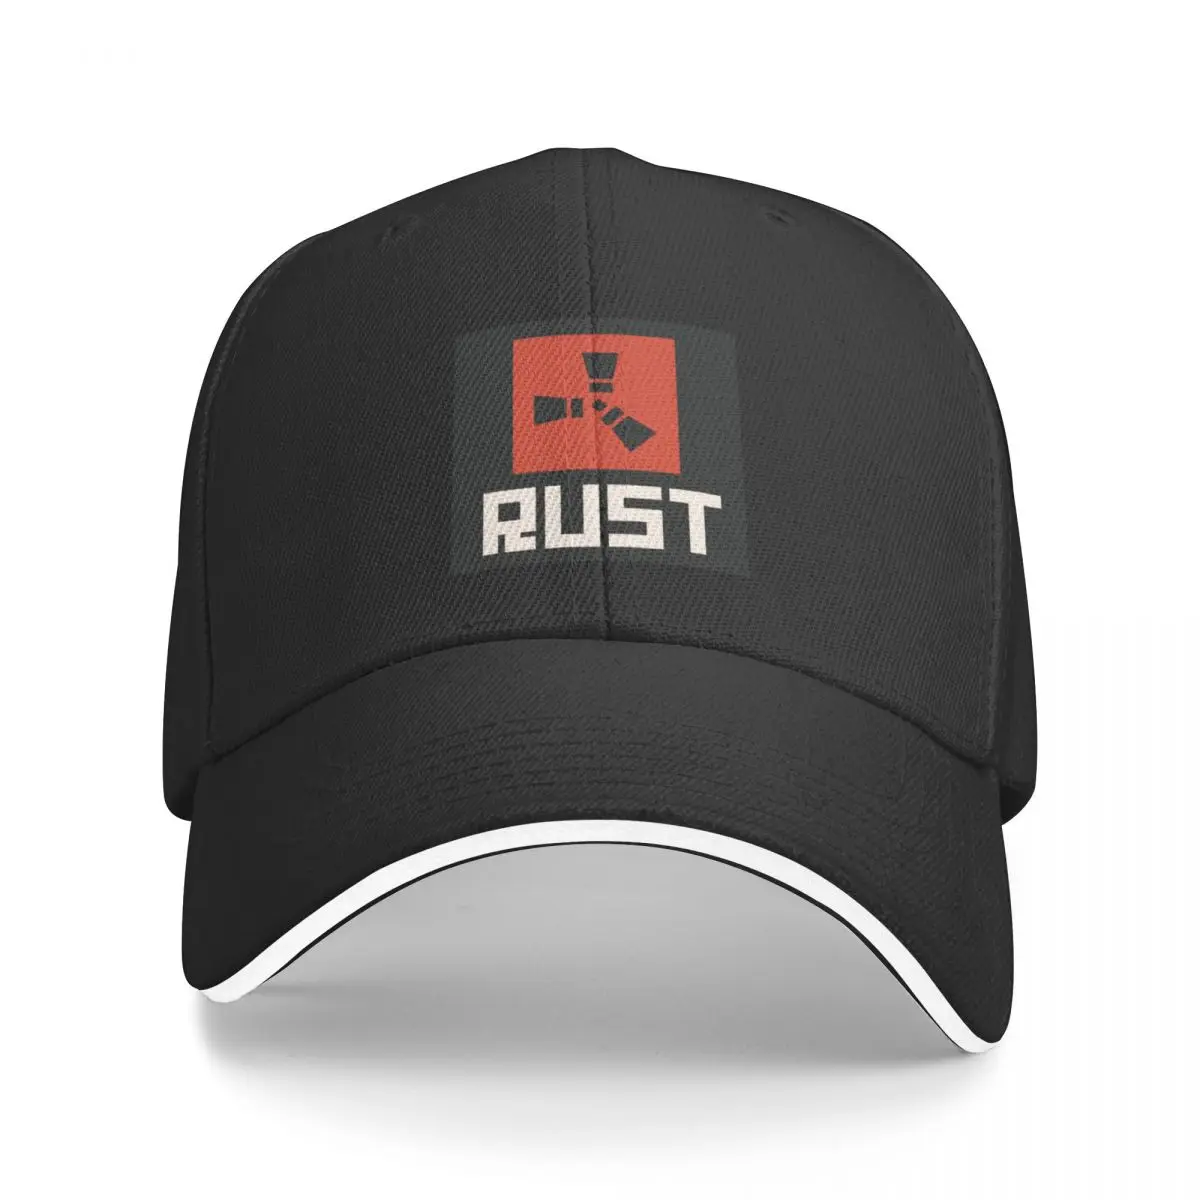 

New Rust Video Game PVP Survival Game Baseball Cap Vintage Hats Horse Hat Hat For Man Women's